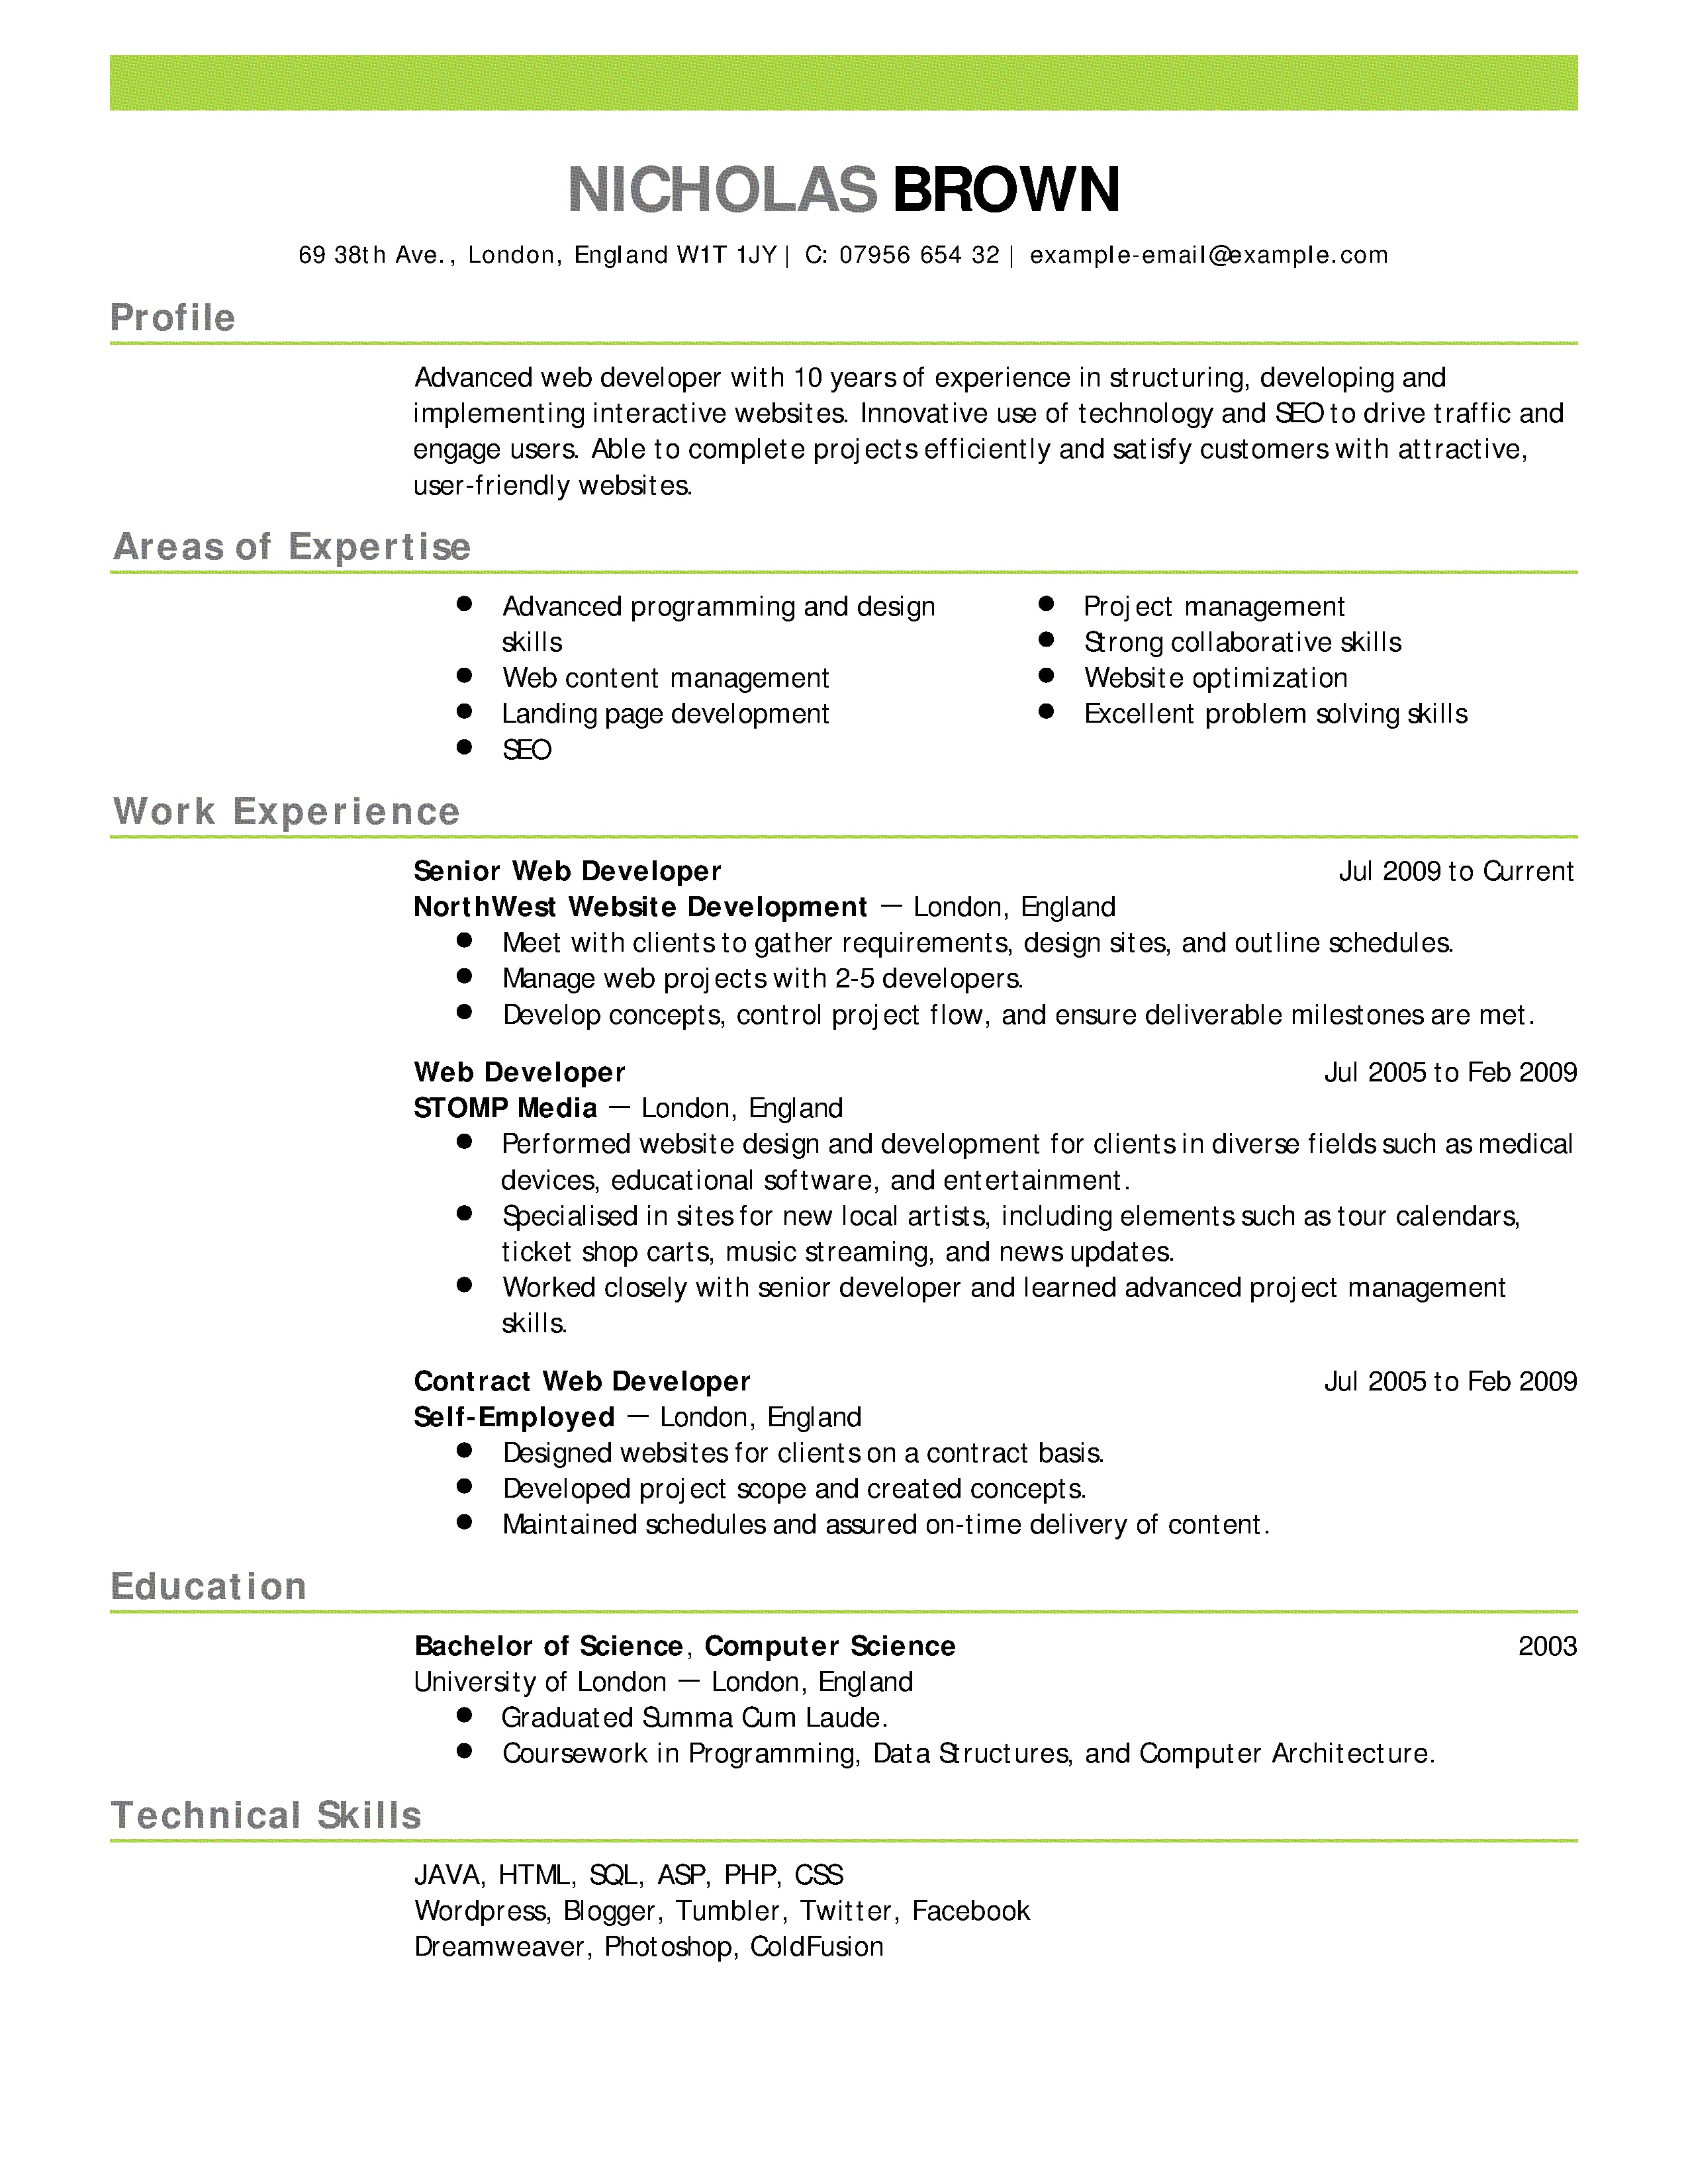 job resume example and samples